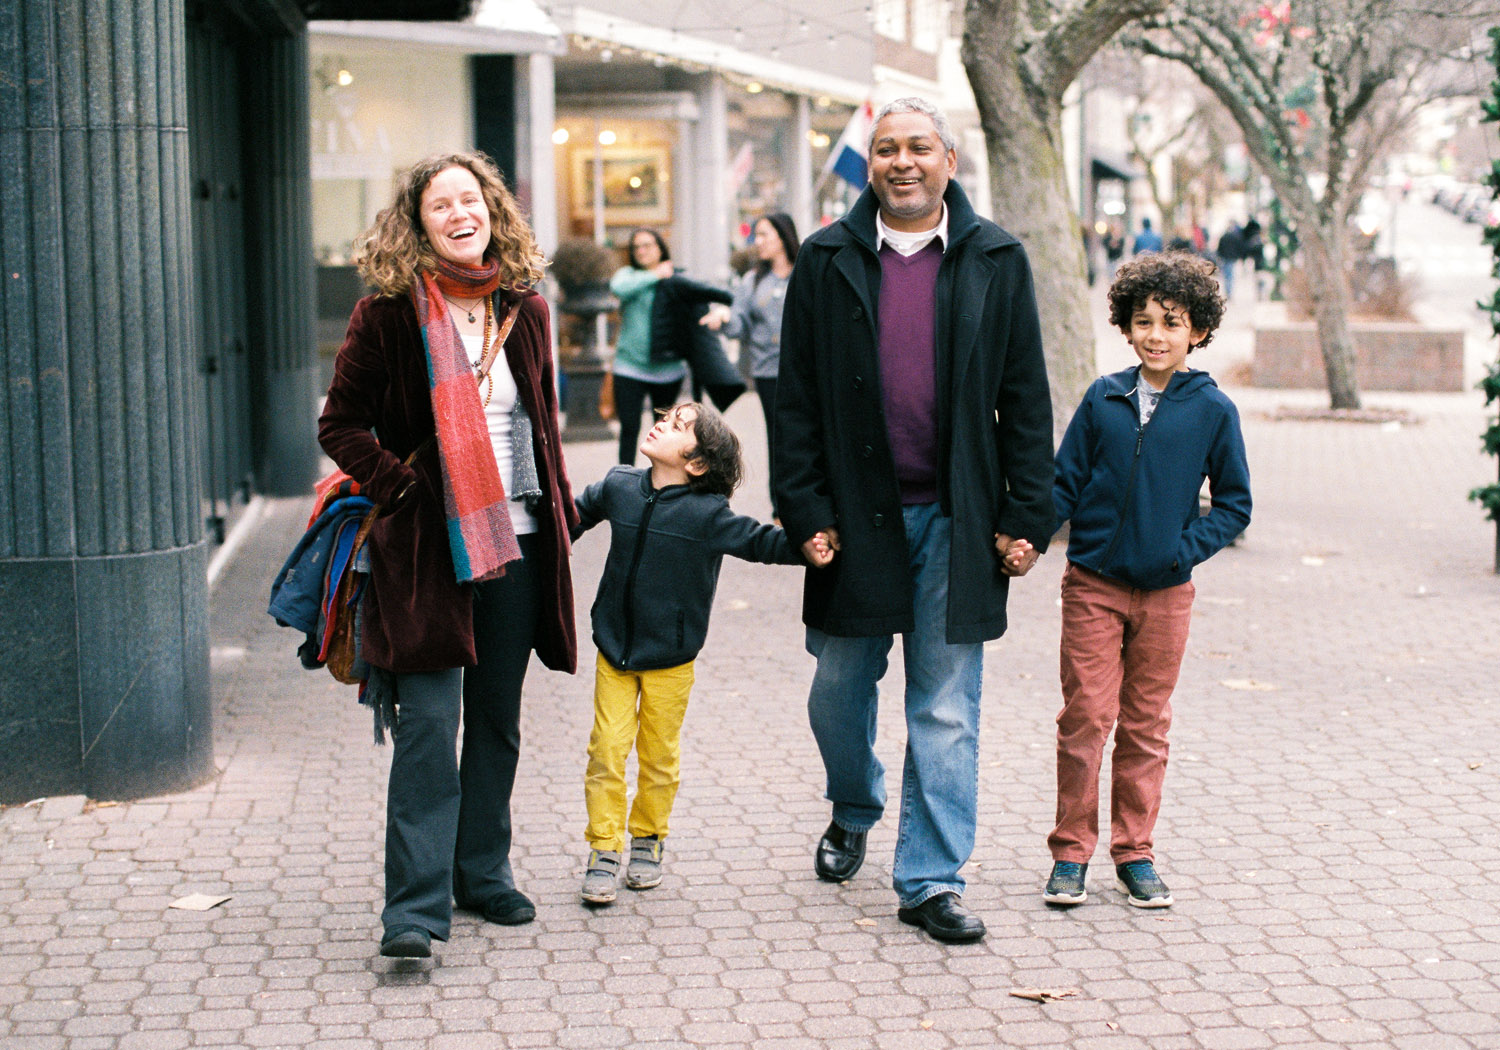 New Jersey New York Candid Family Portrait Photography.jpg